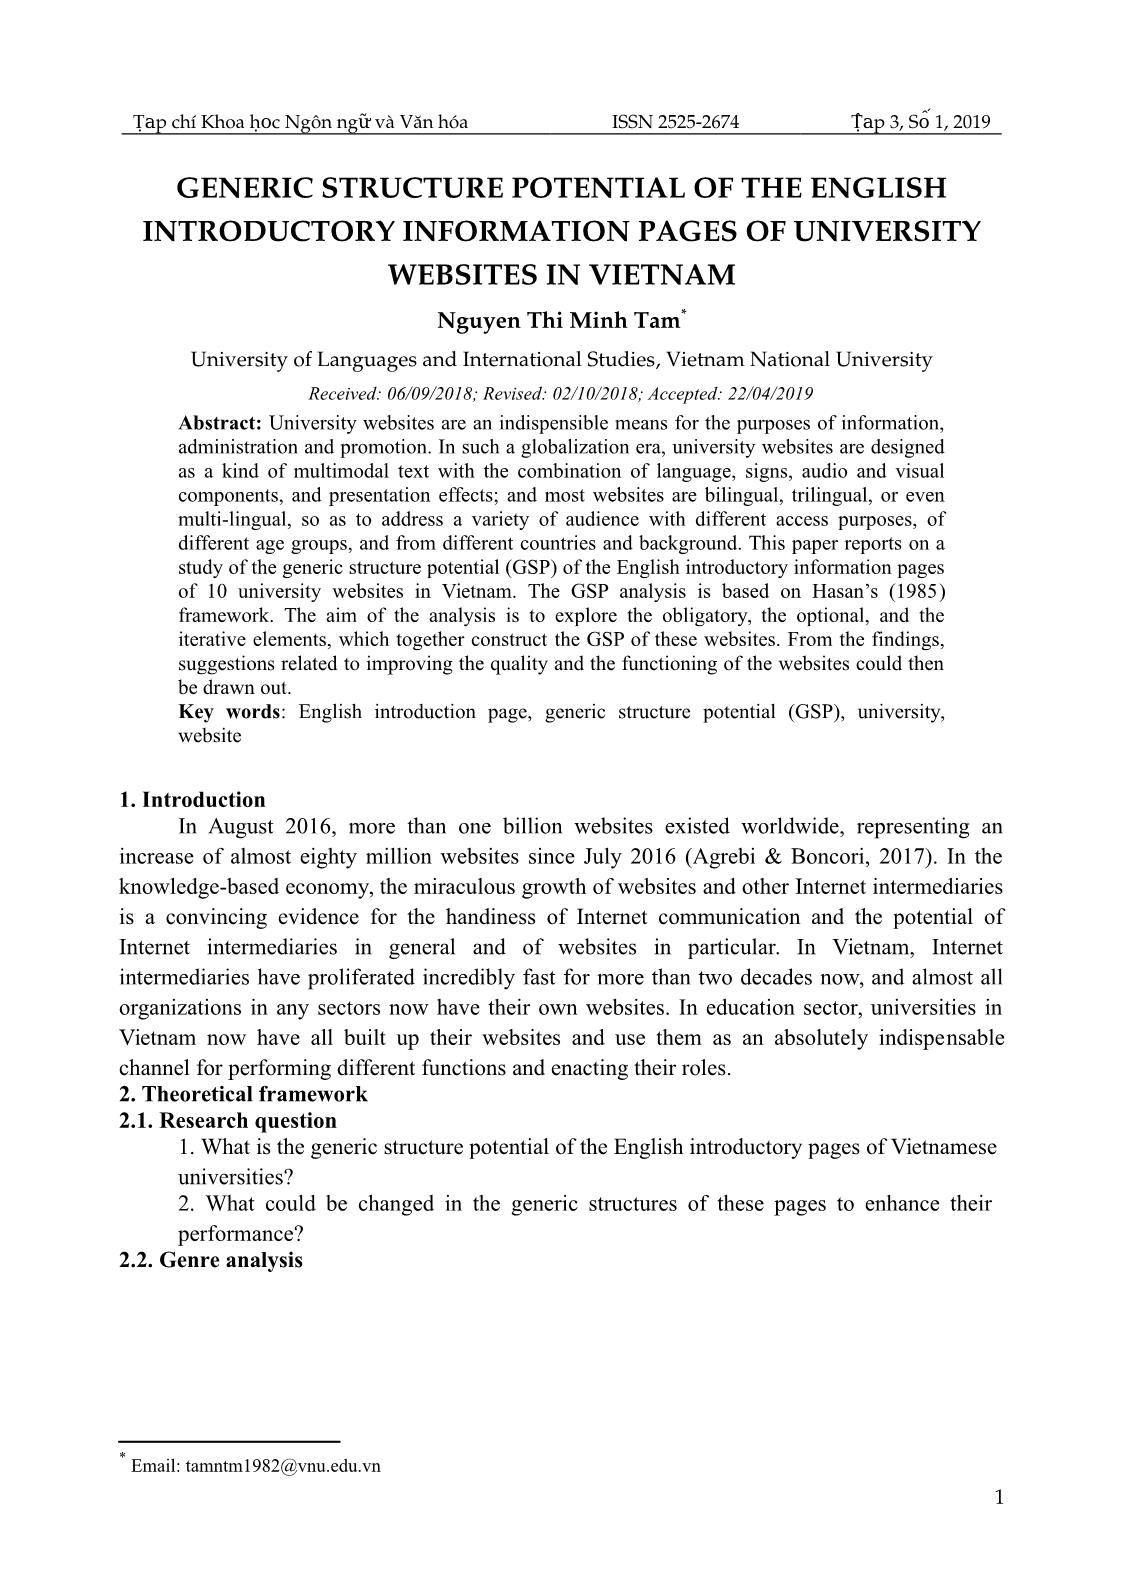 Generic structure potential of the english introductory information pages of university websites in Vietnam trang 1